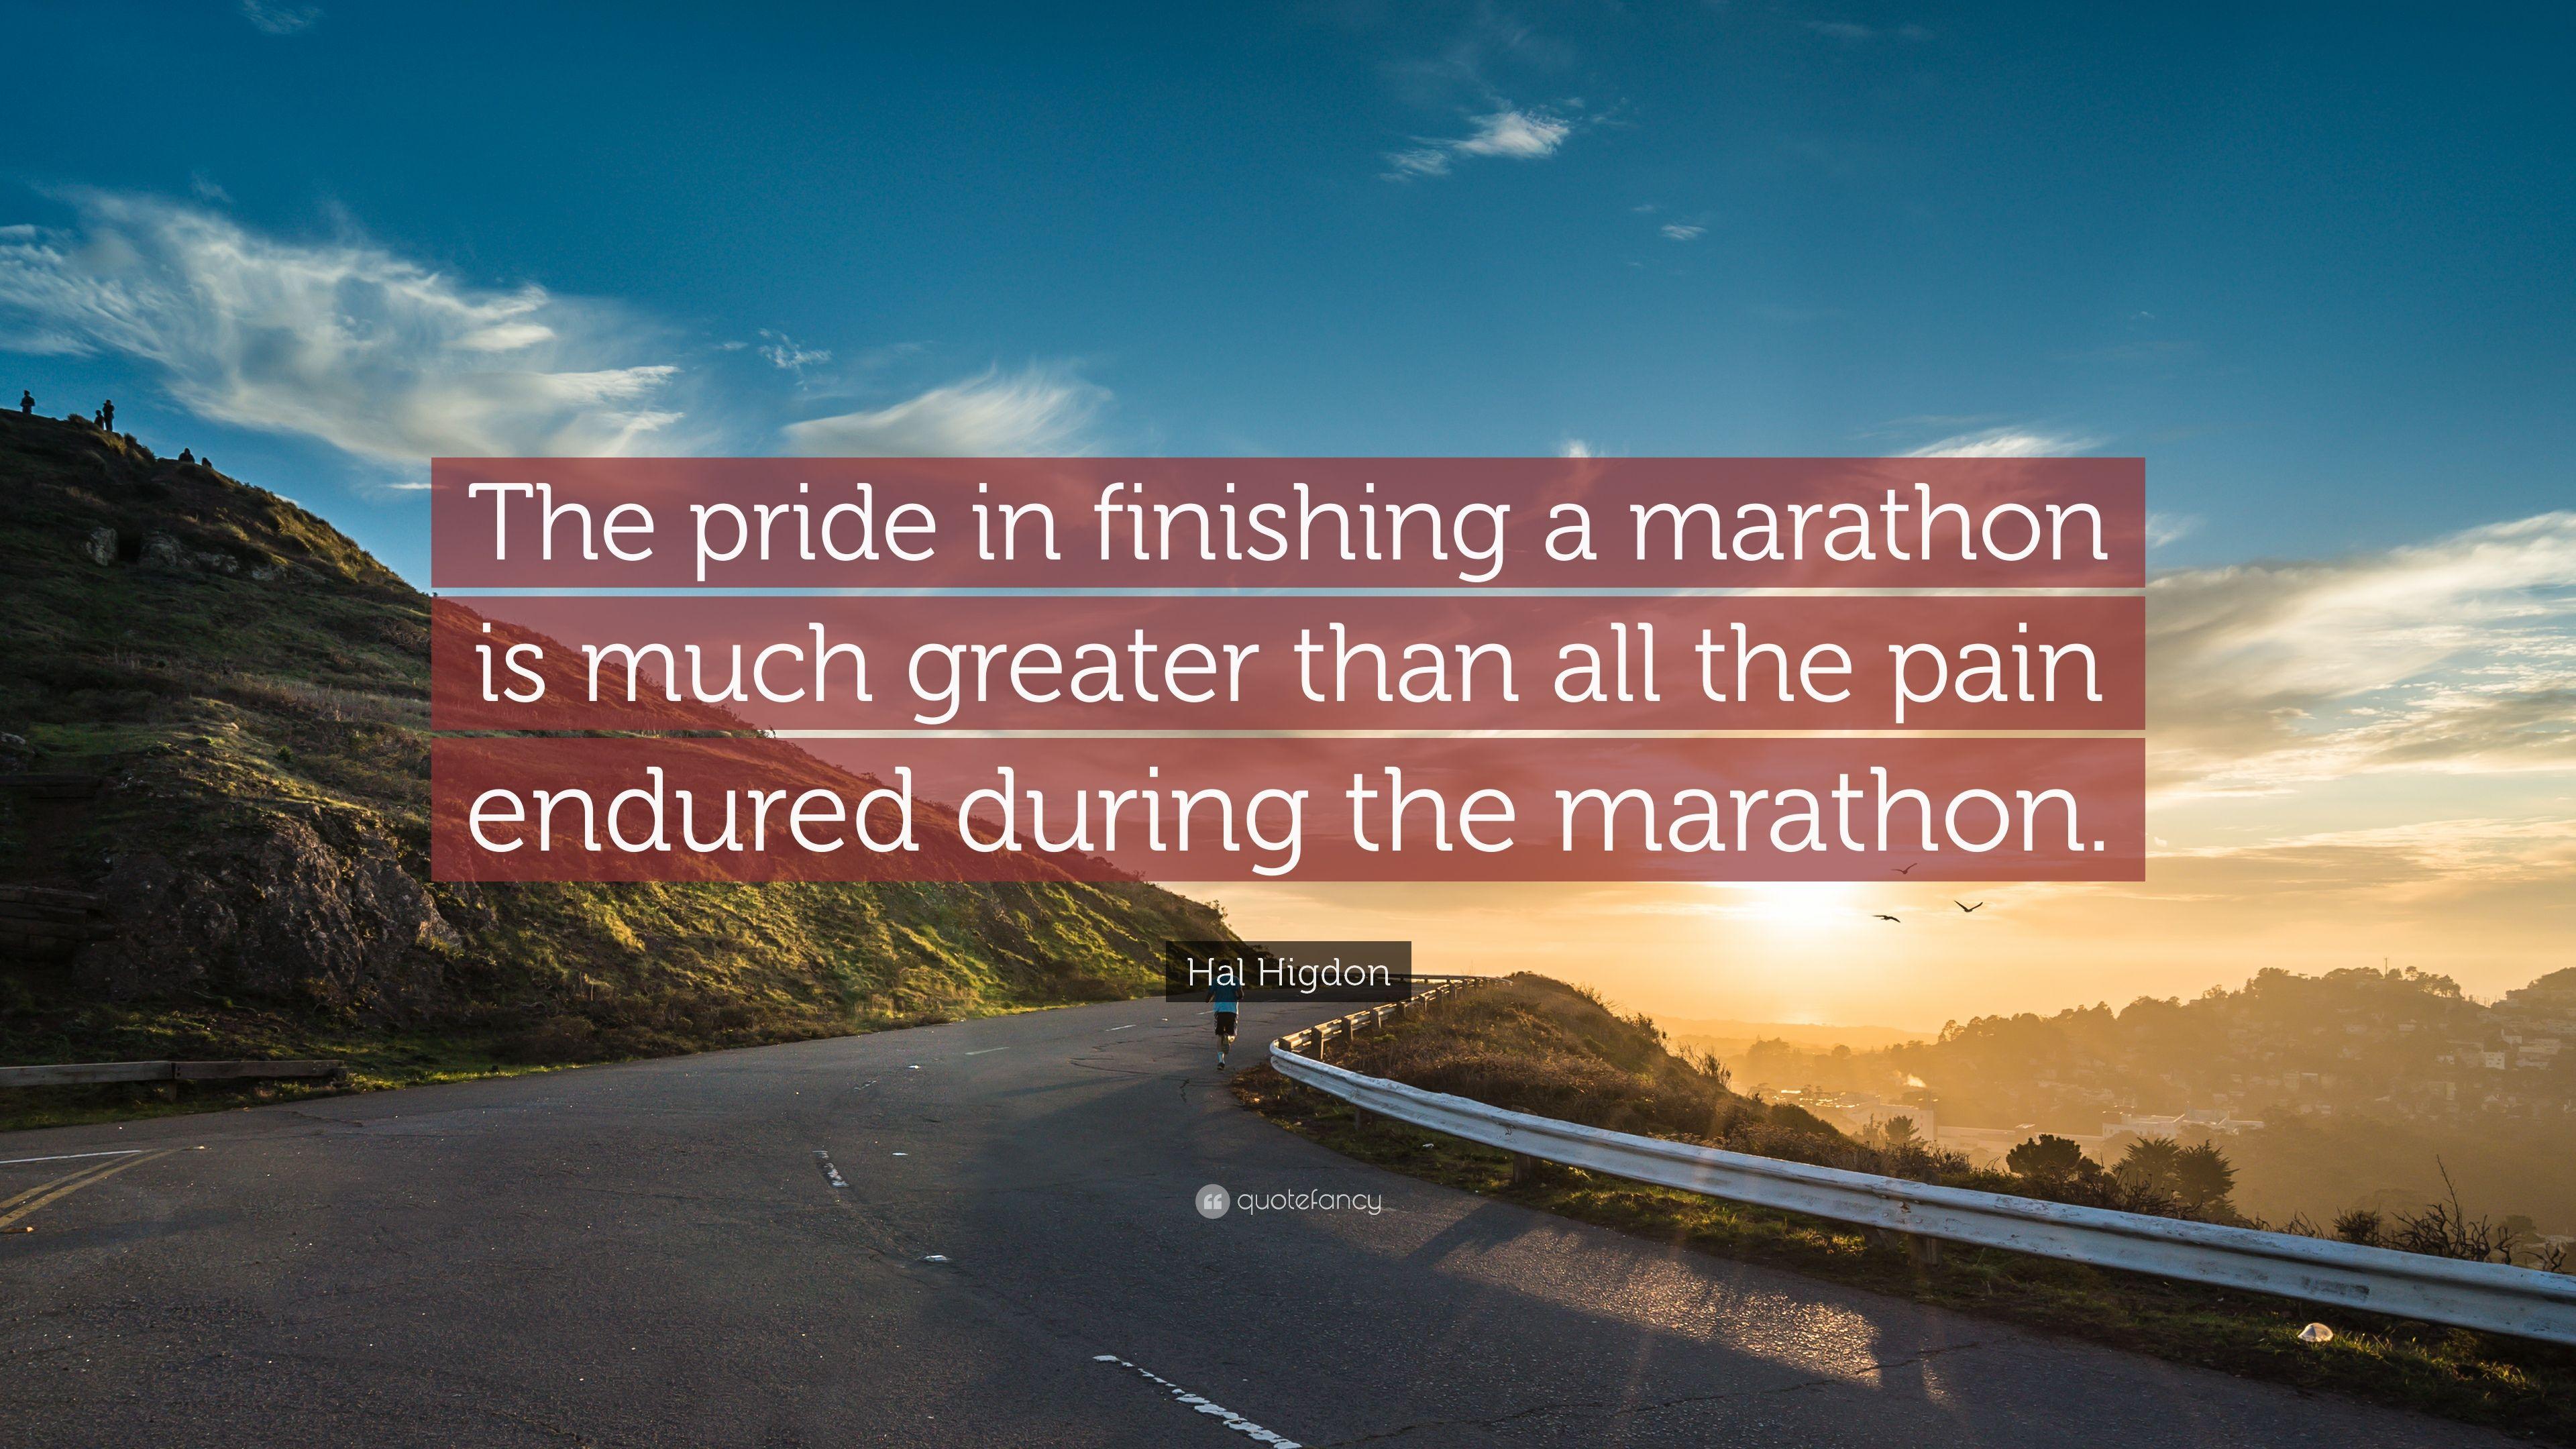 Hal Higdon Quote: “The pride in finishing a marathon is much